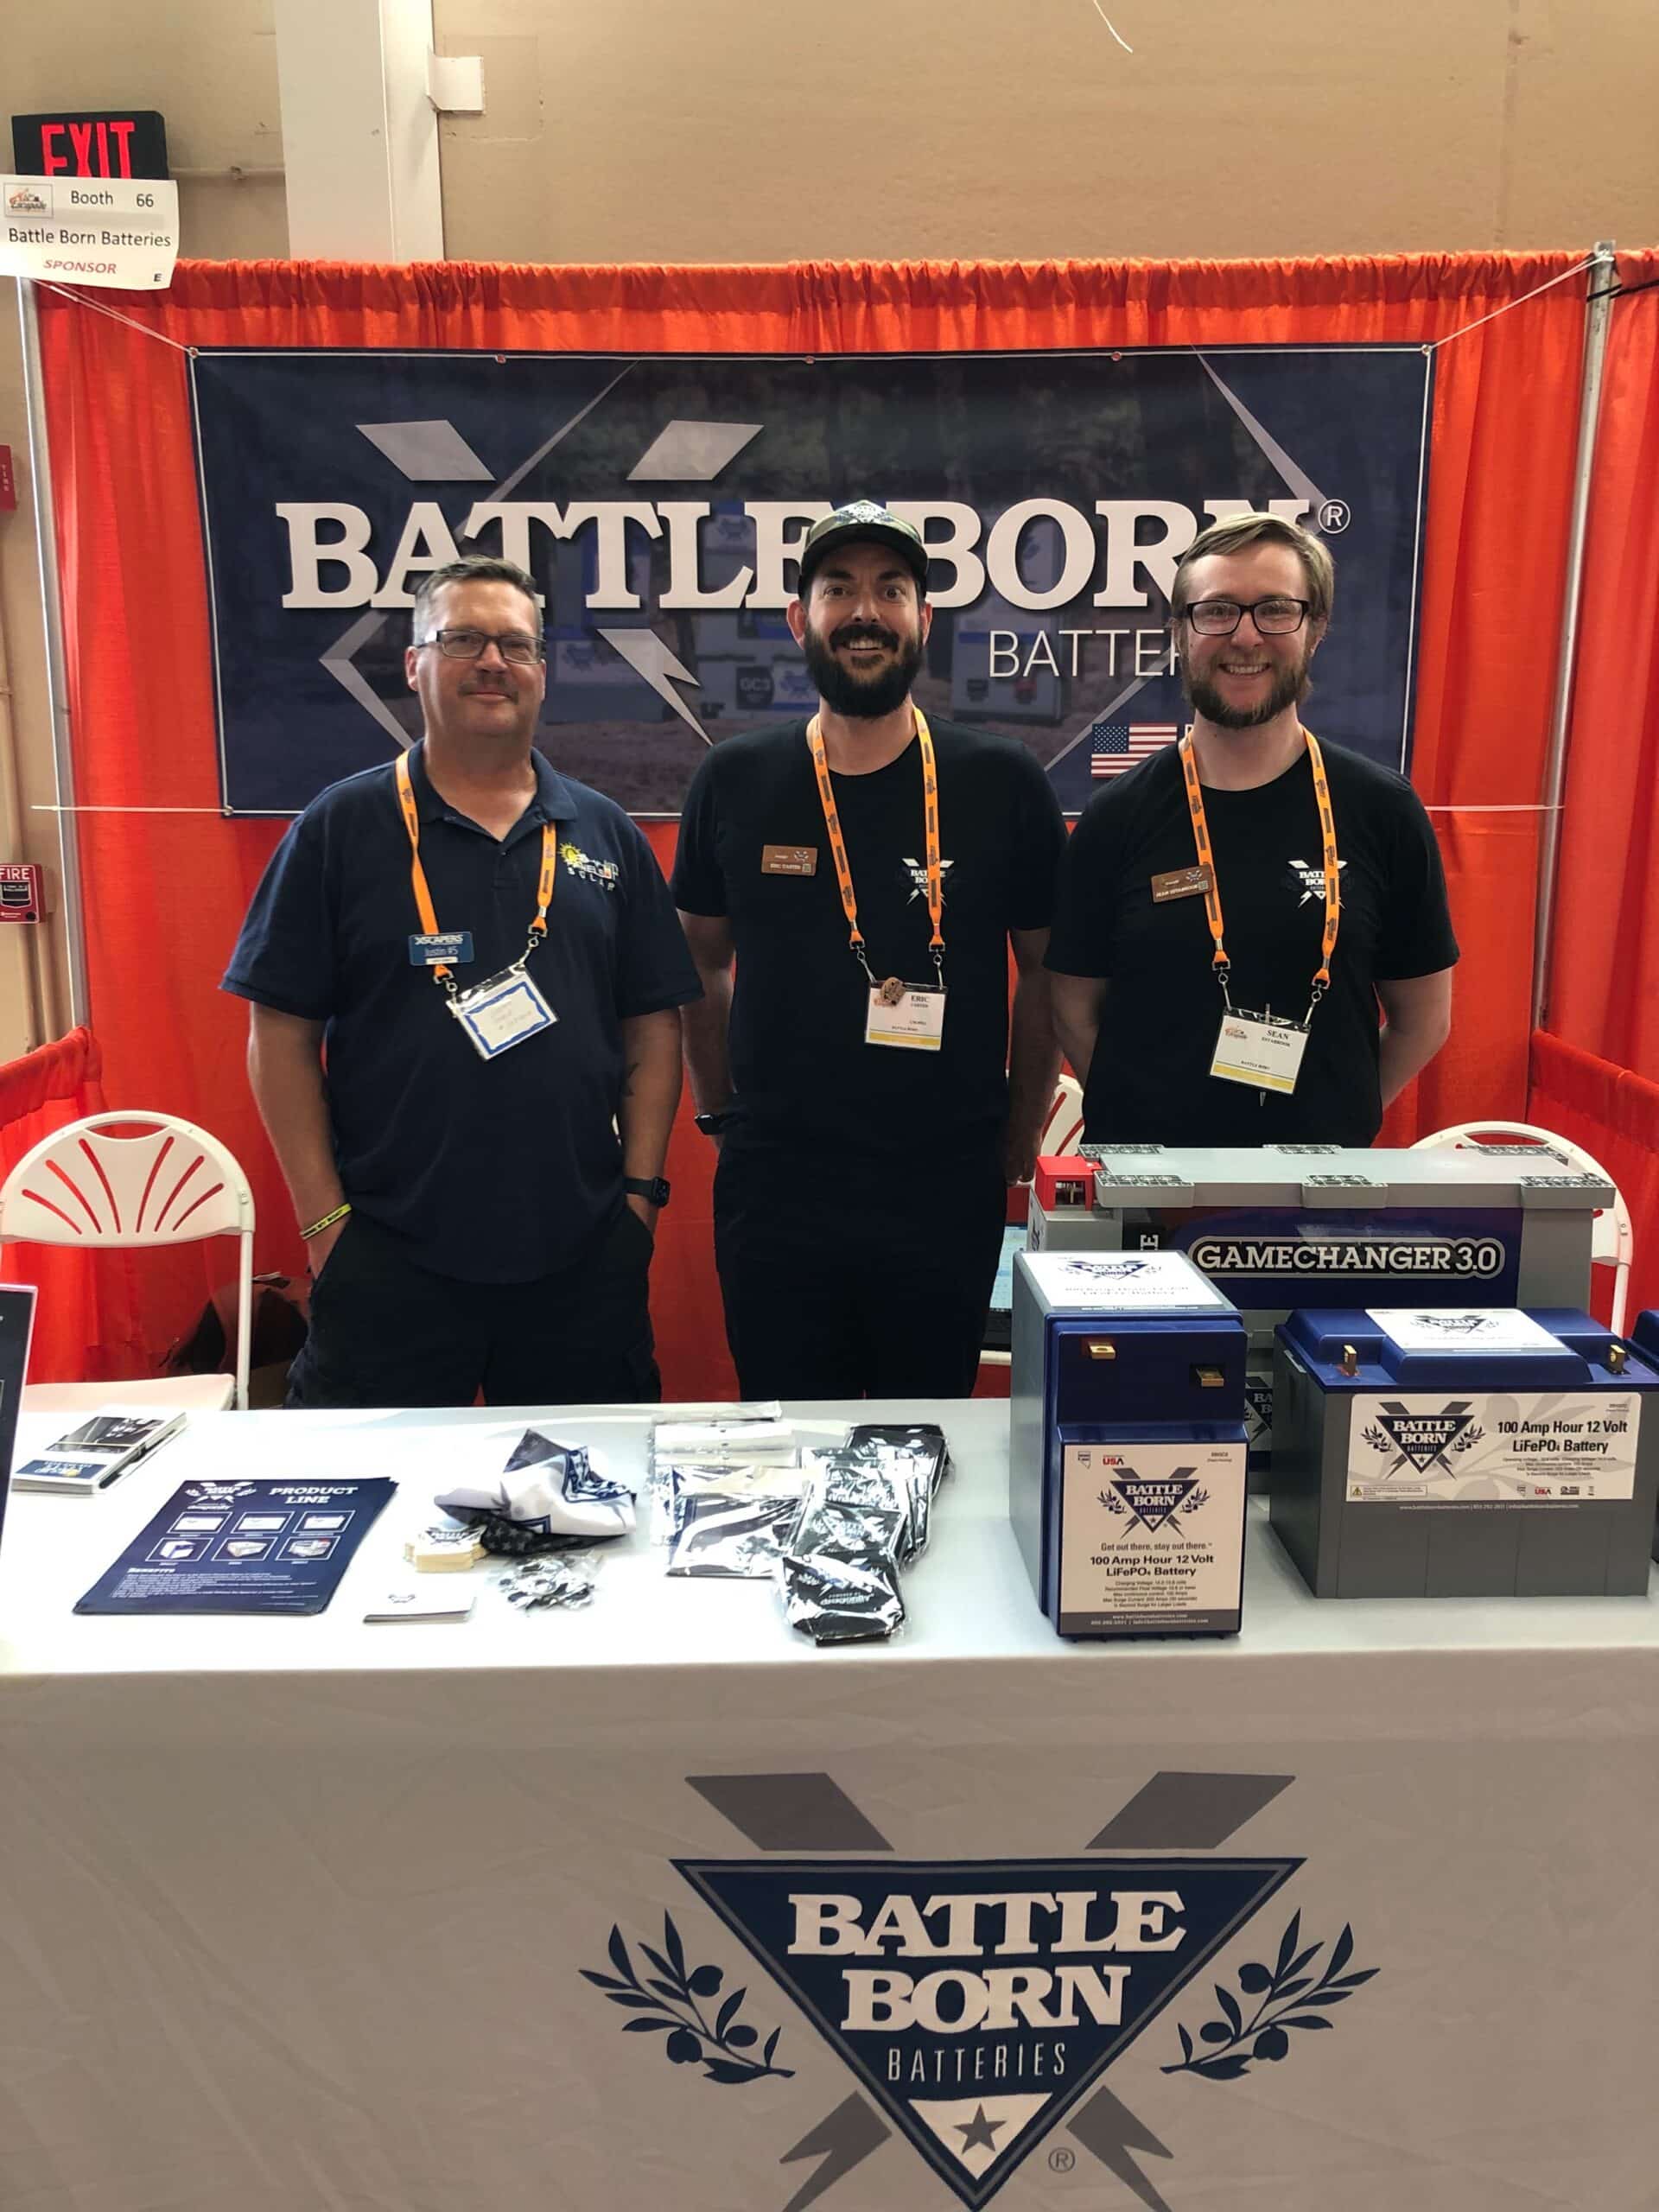 Battle Born Batteries is proud to join the 62nd Escapade in Tucson, Arizona once again. Battle Born team standing at a Battle Born Batteries booth